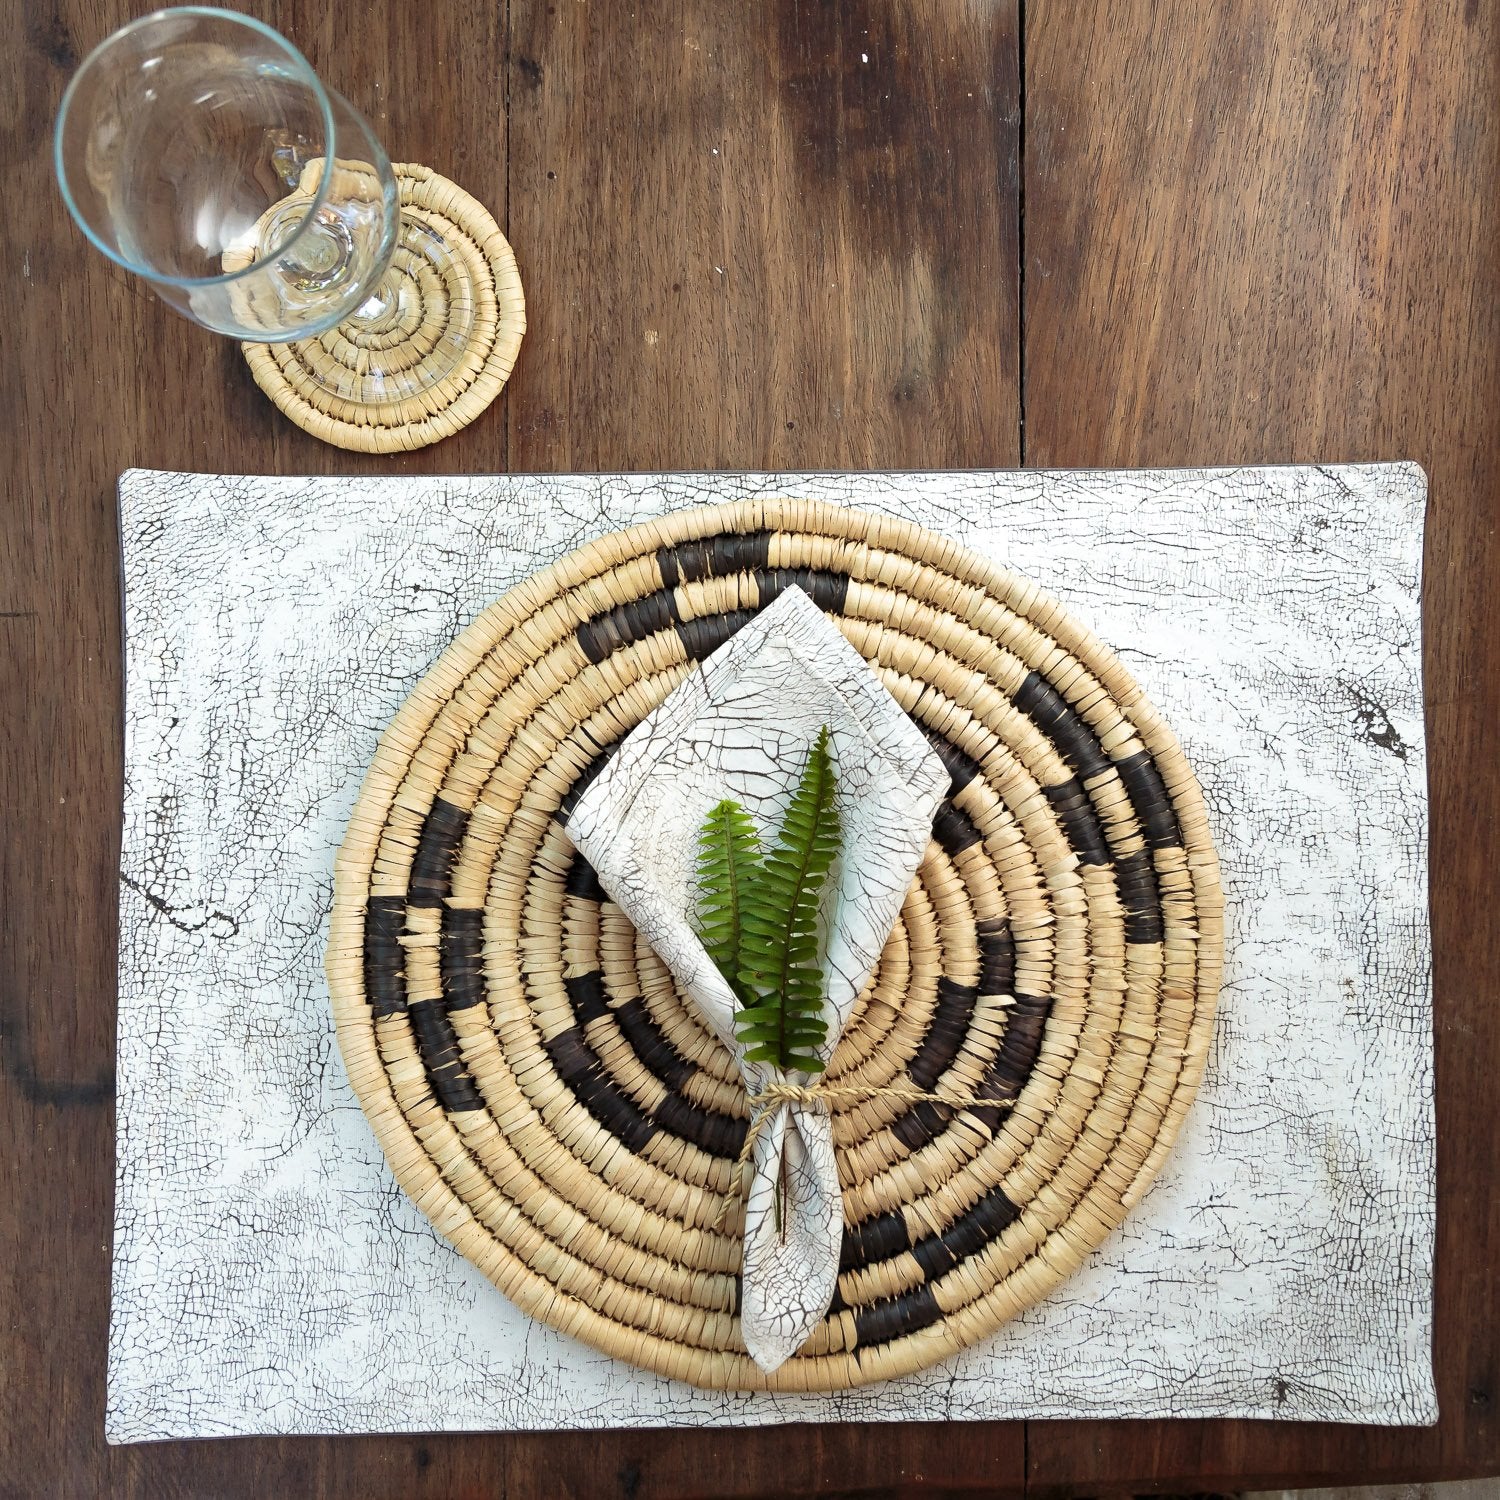 Woven Placemat with Patterns - Weaving by TRIBAL TEXTILES - Handcrafted Home Decor Interiors - African Made